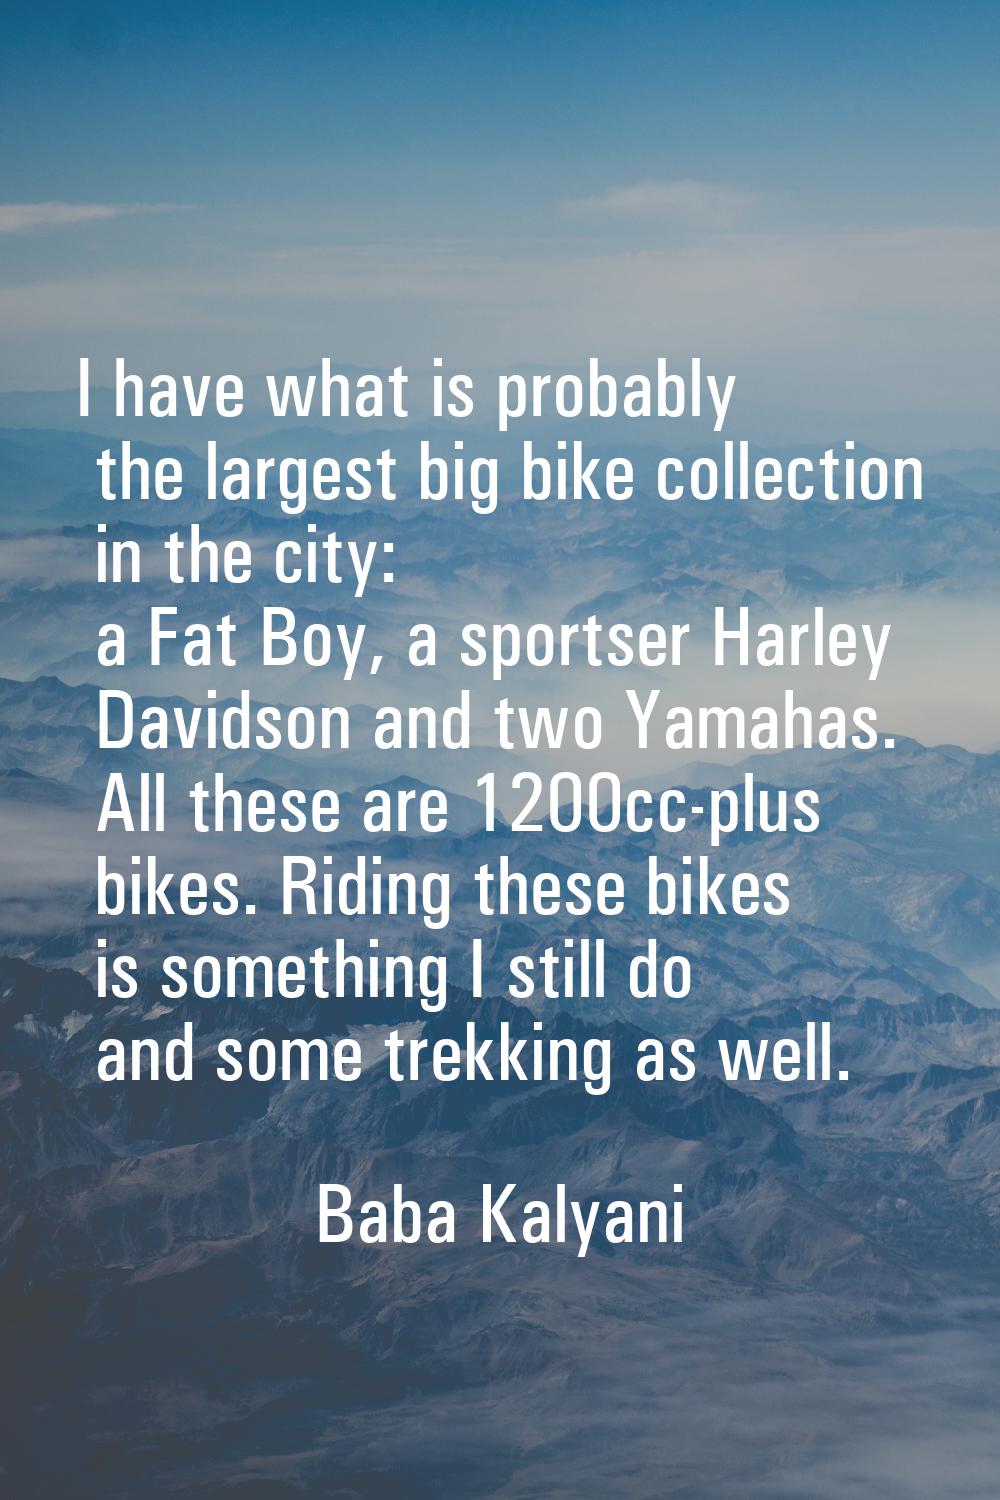 I have what is probably the largest big bike collection in the city: a Fat Boy, a sportser Harley D